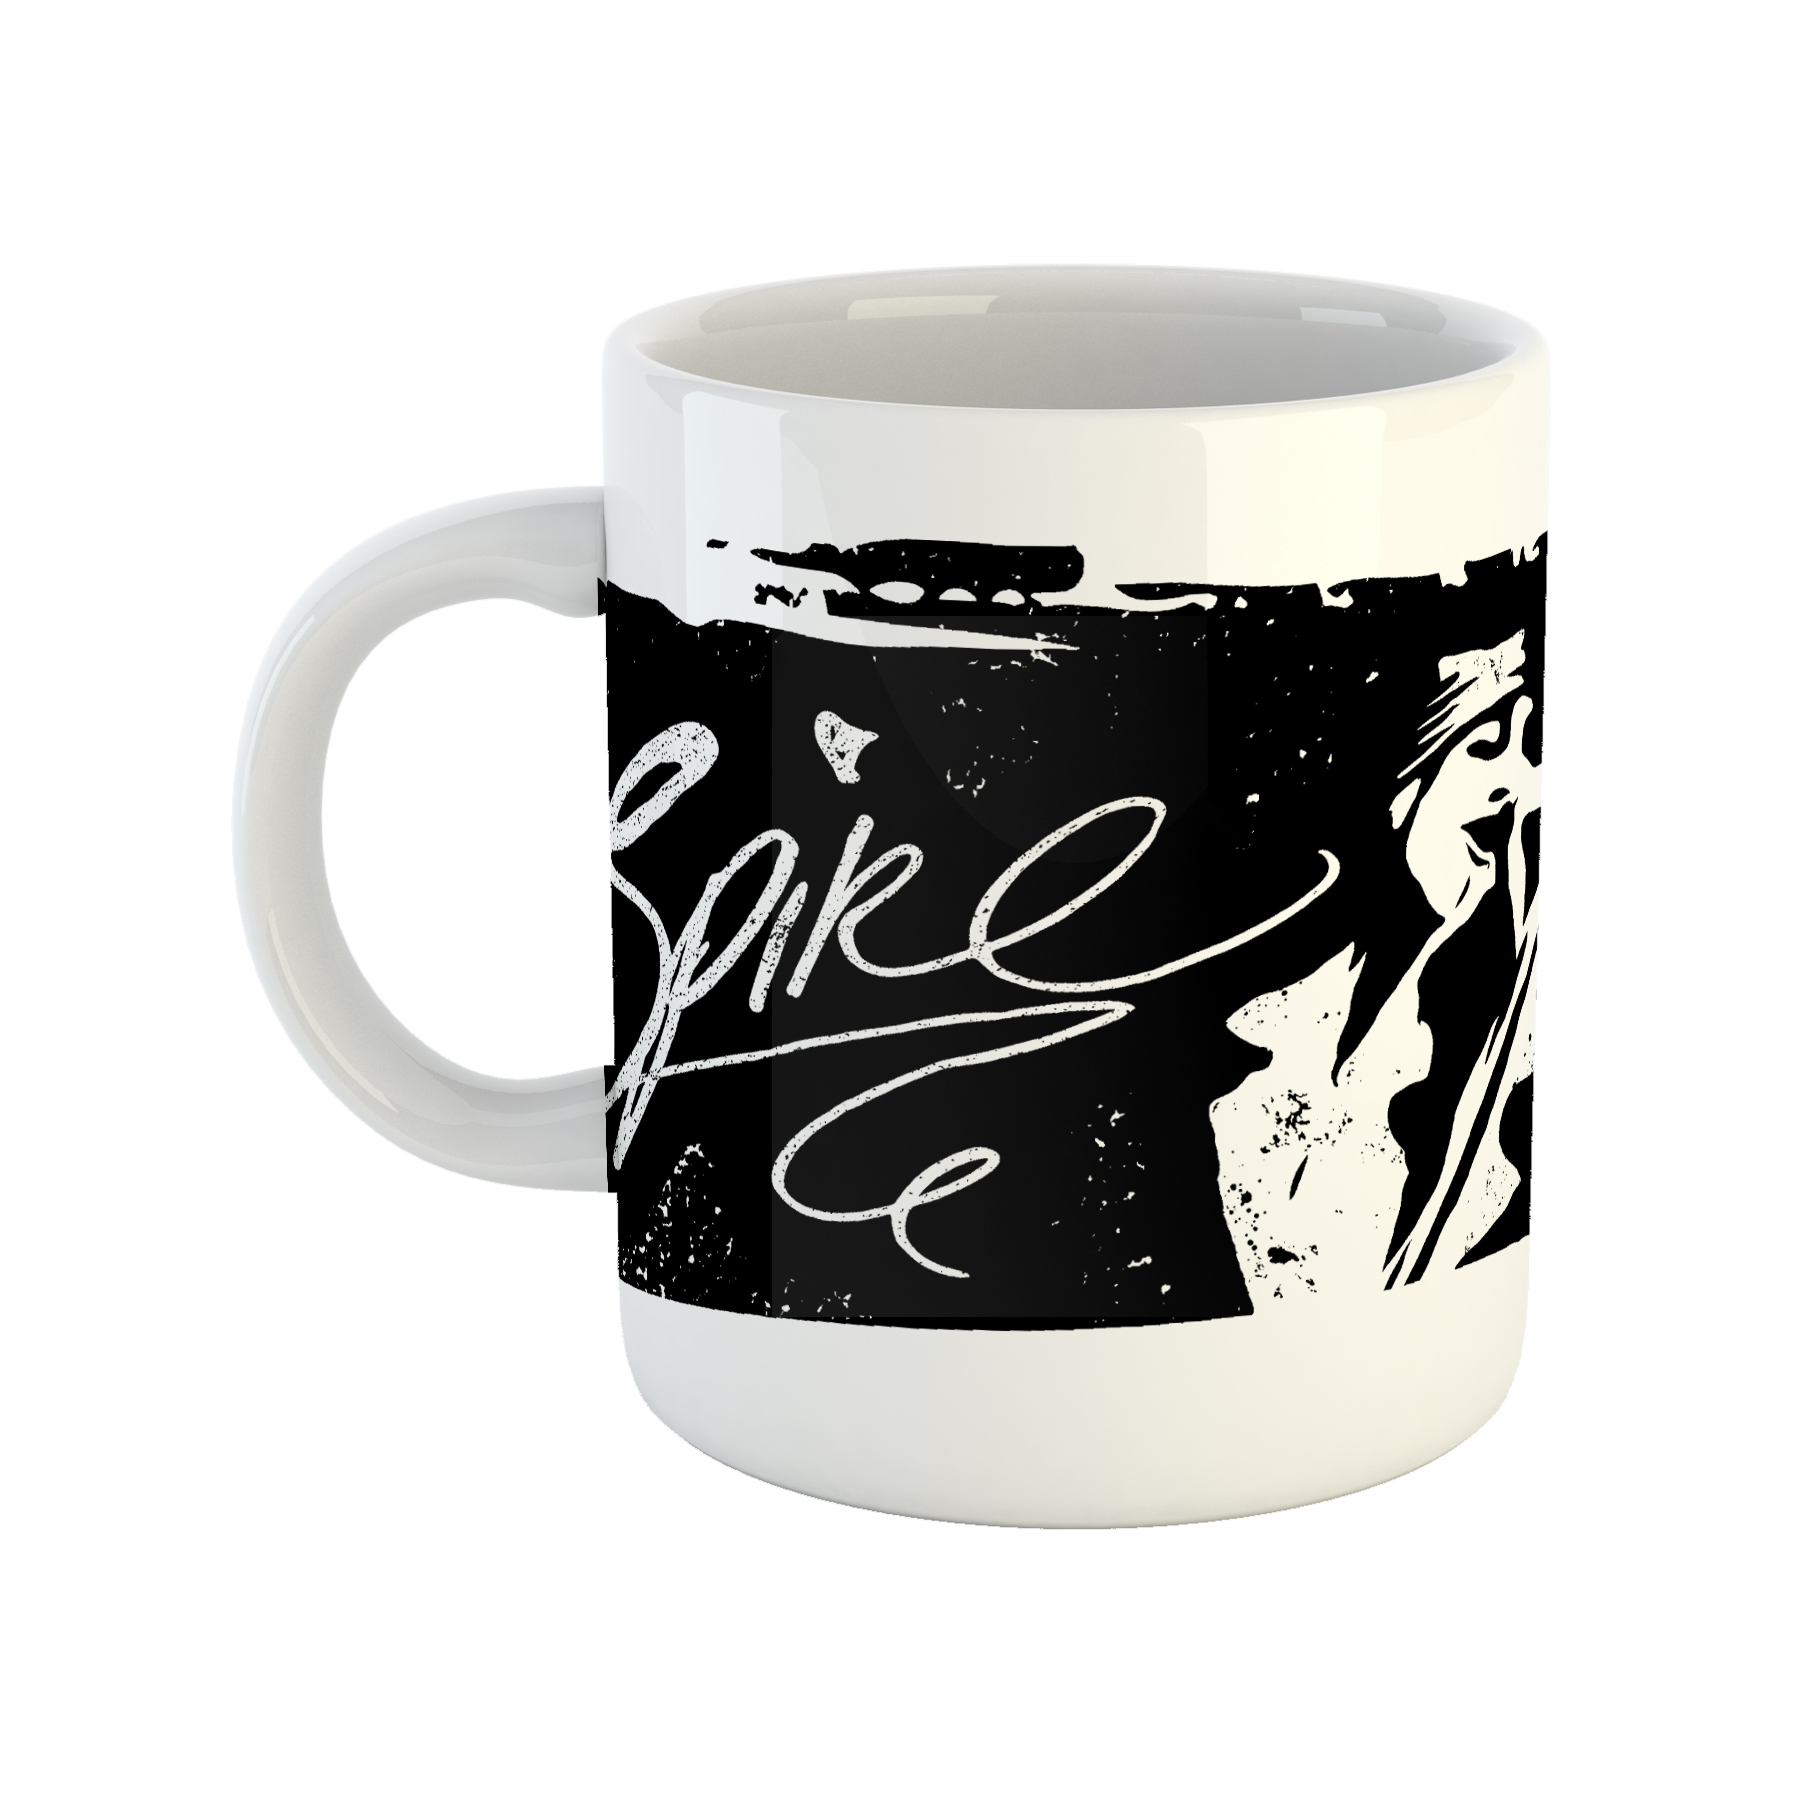 Spike mug, black with white graphic of spike singing and logo